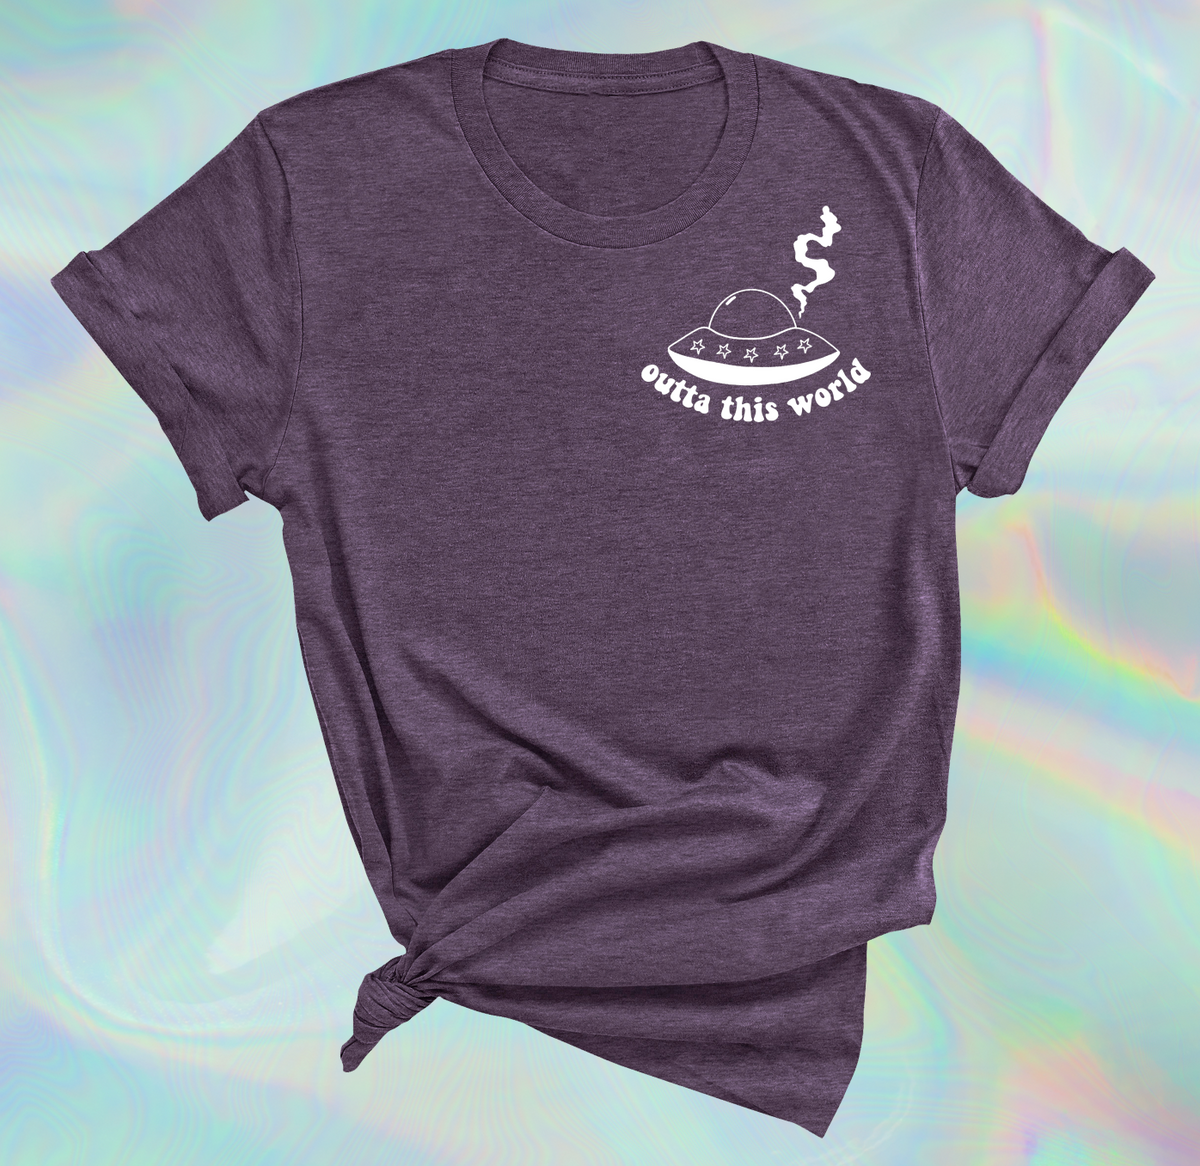 Outta this World Tee the Shop | Marbert